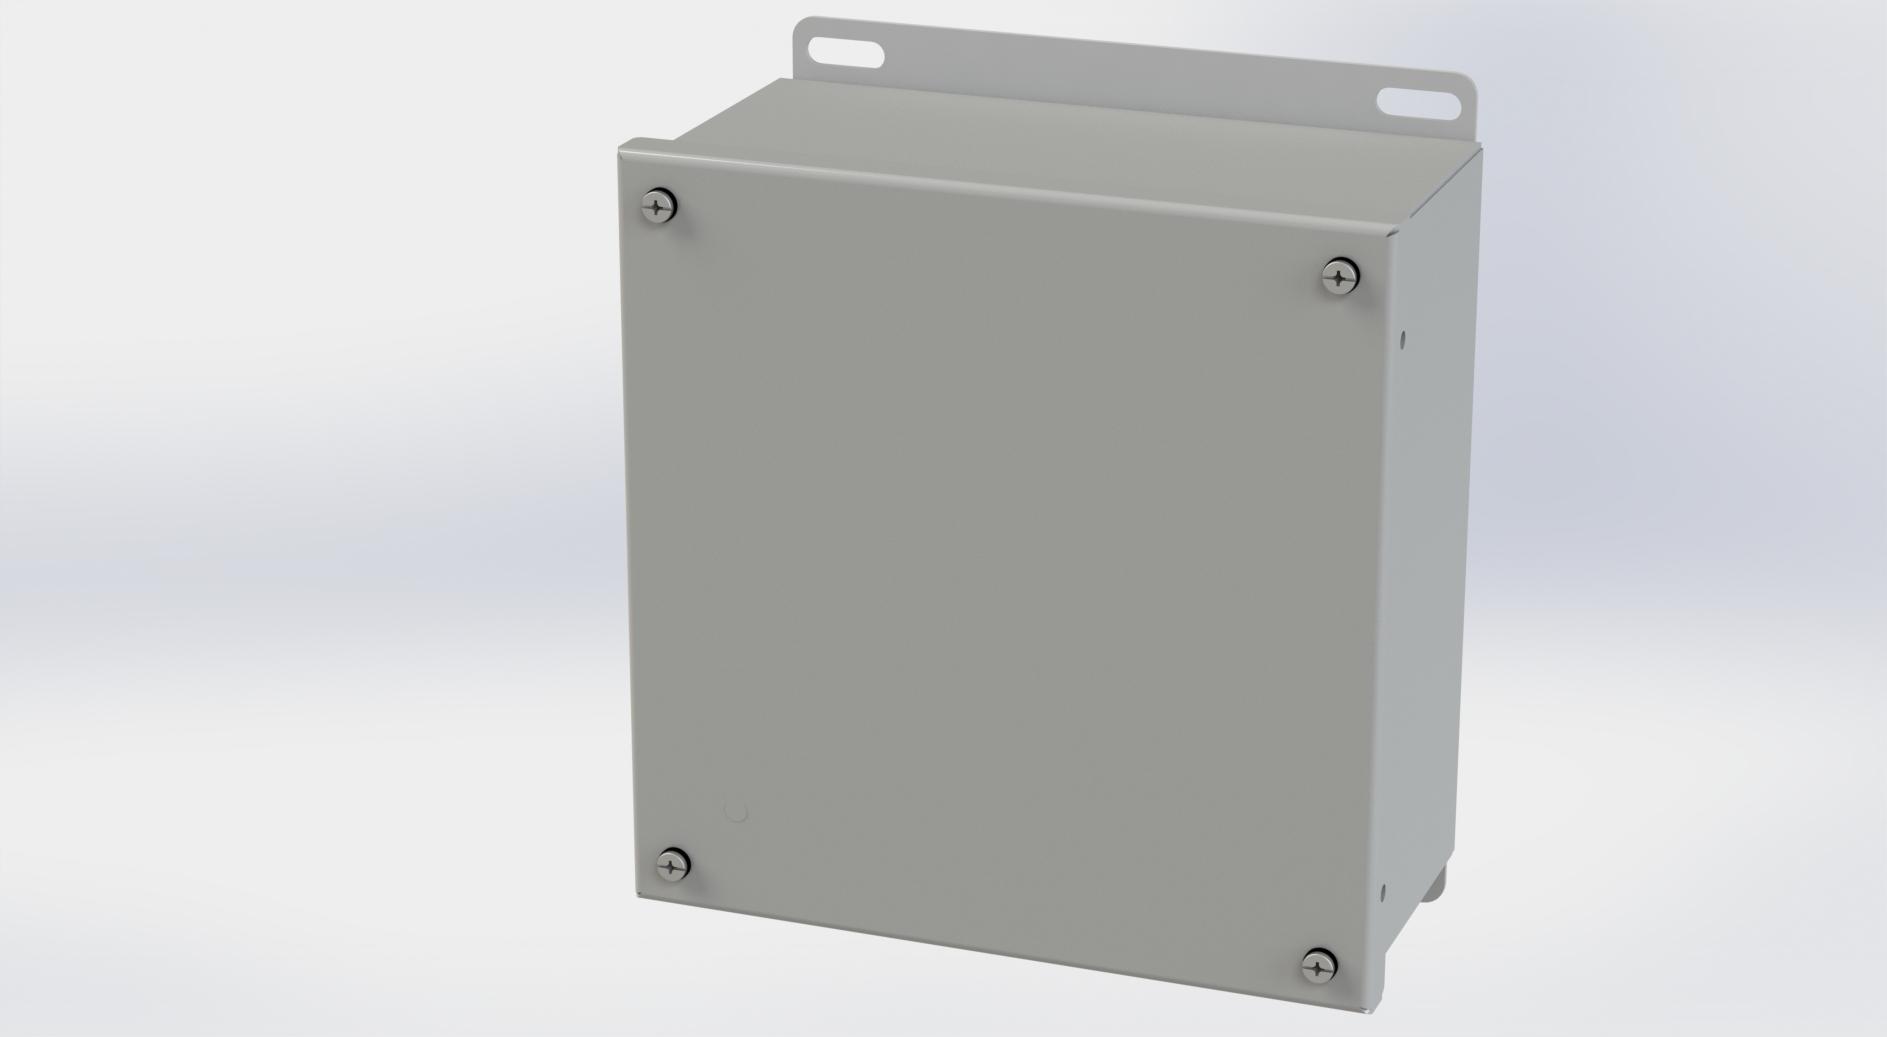 Saginaw Control SCE-808SC SC Enclosure, Height:8.13", Width:8.00", Depth:4.00", ANSI-61 gray powder coating inside and out.  Optional sub-panels are powder coated white.